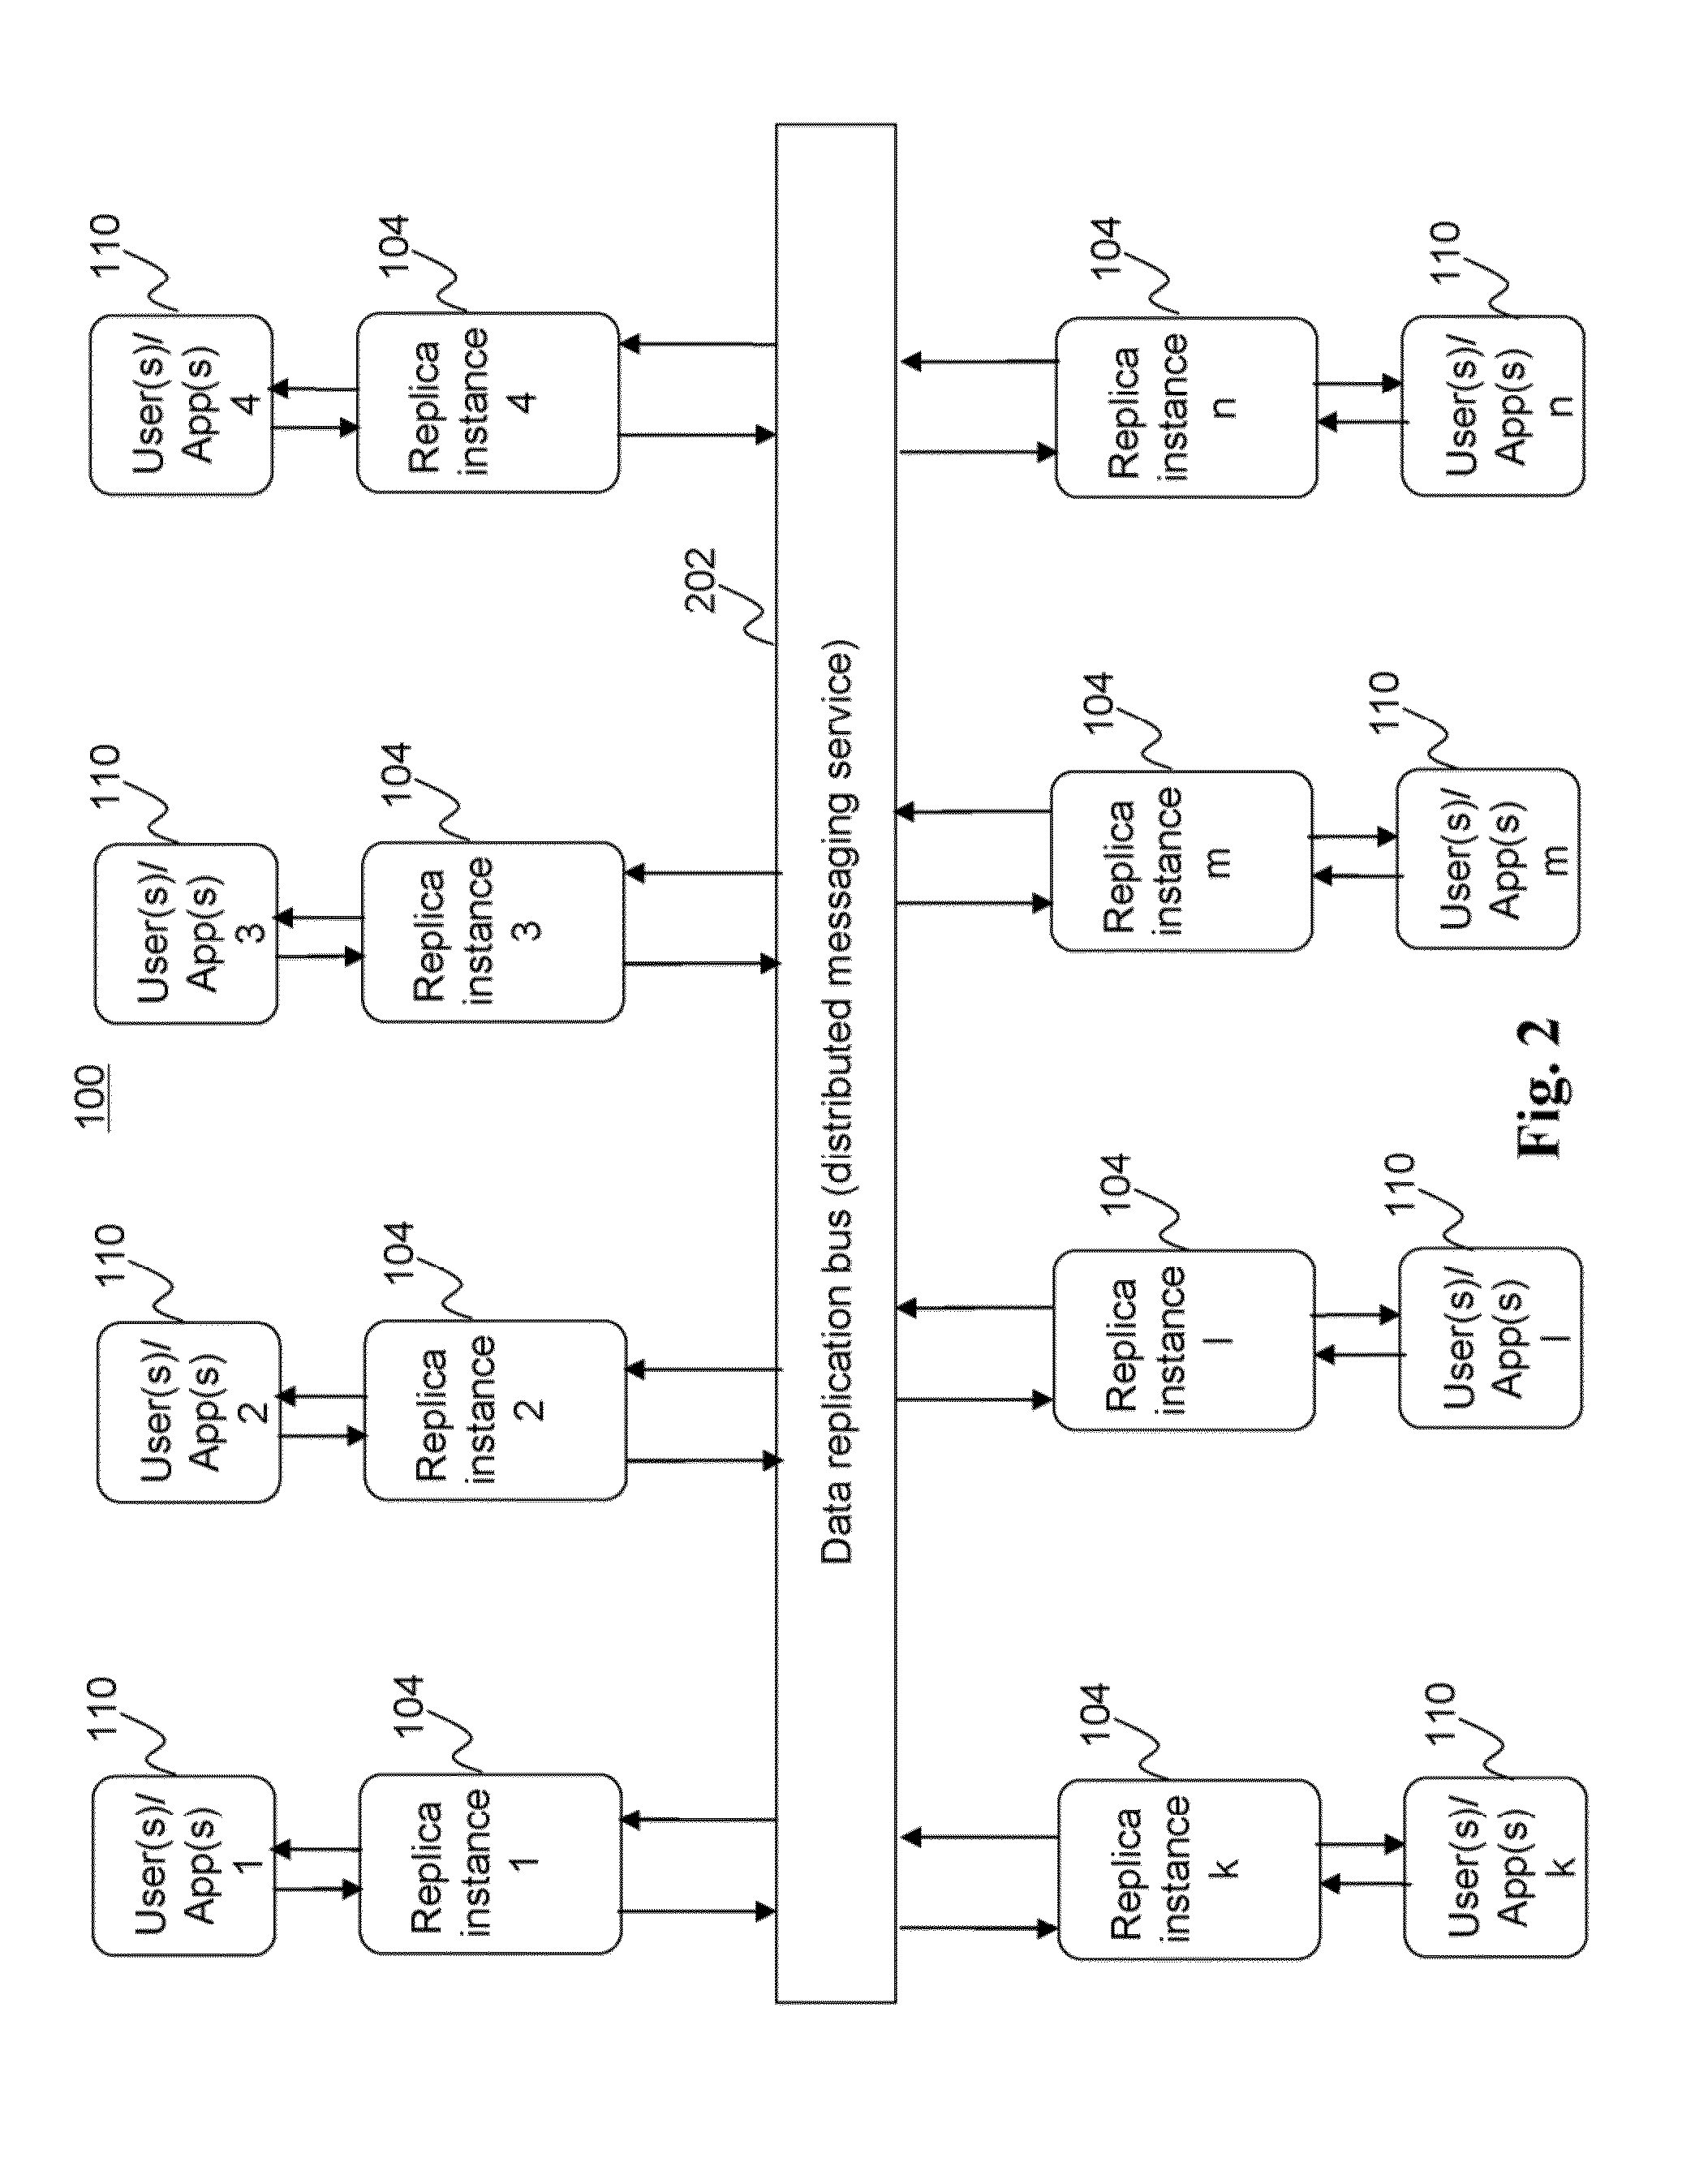 Method and system for resolving data inconsistency